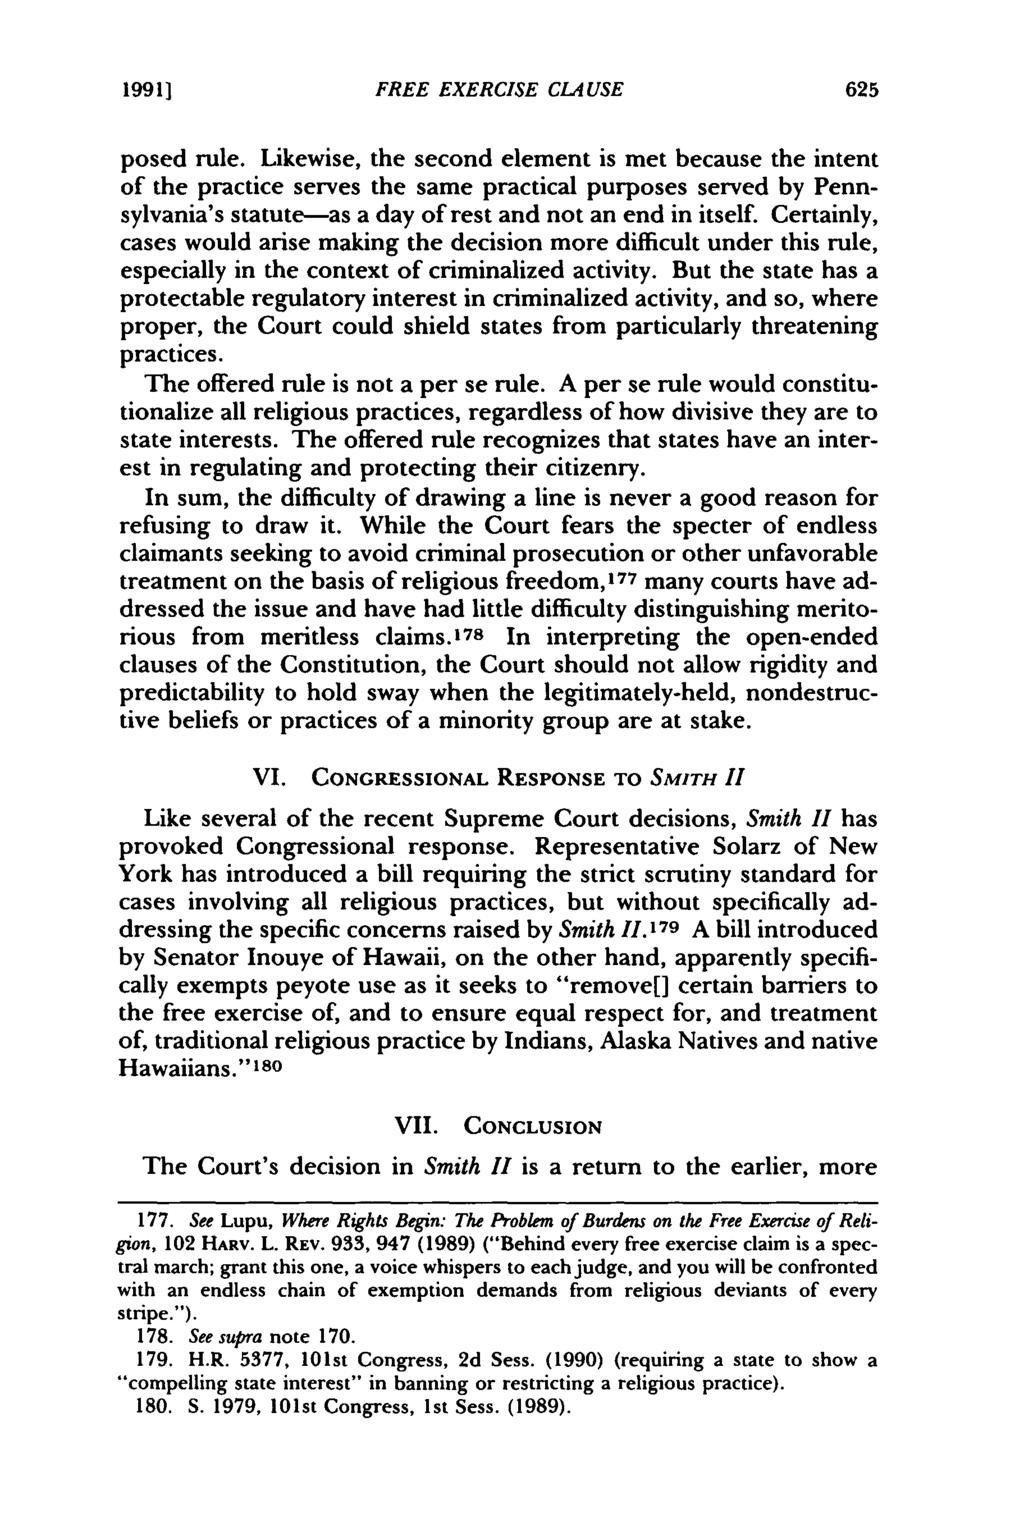 19911 Butler: Constitutional Law The Free Exercise Clause: The Supreme Court Av FREE EXERCISE CIA USE posed rule.